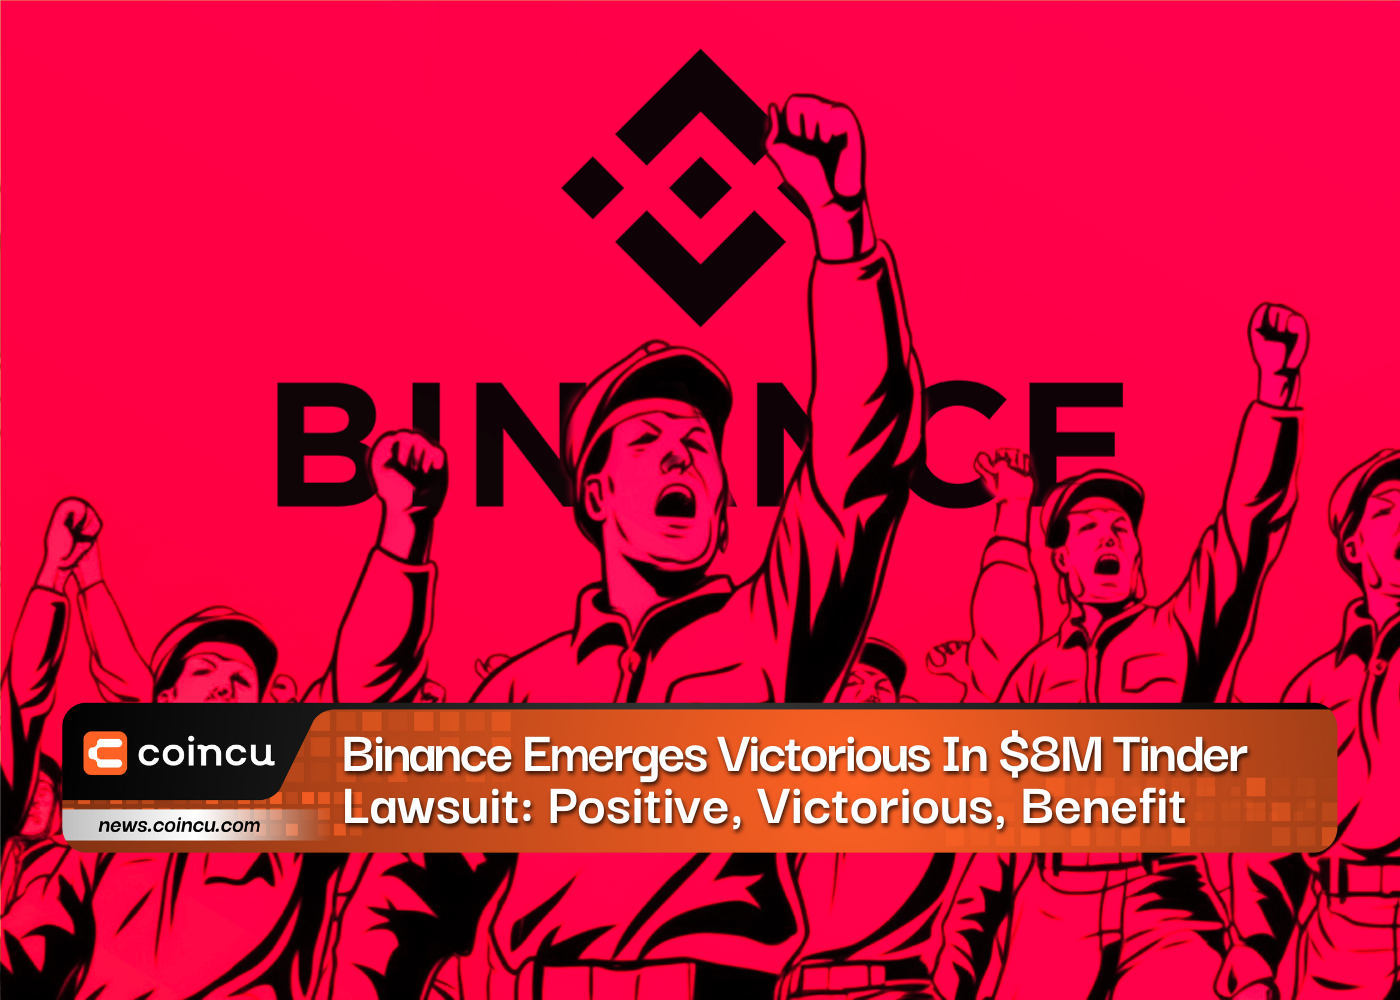 Binance Emerges Victorious In 8M Tinder Lawsuit